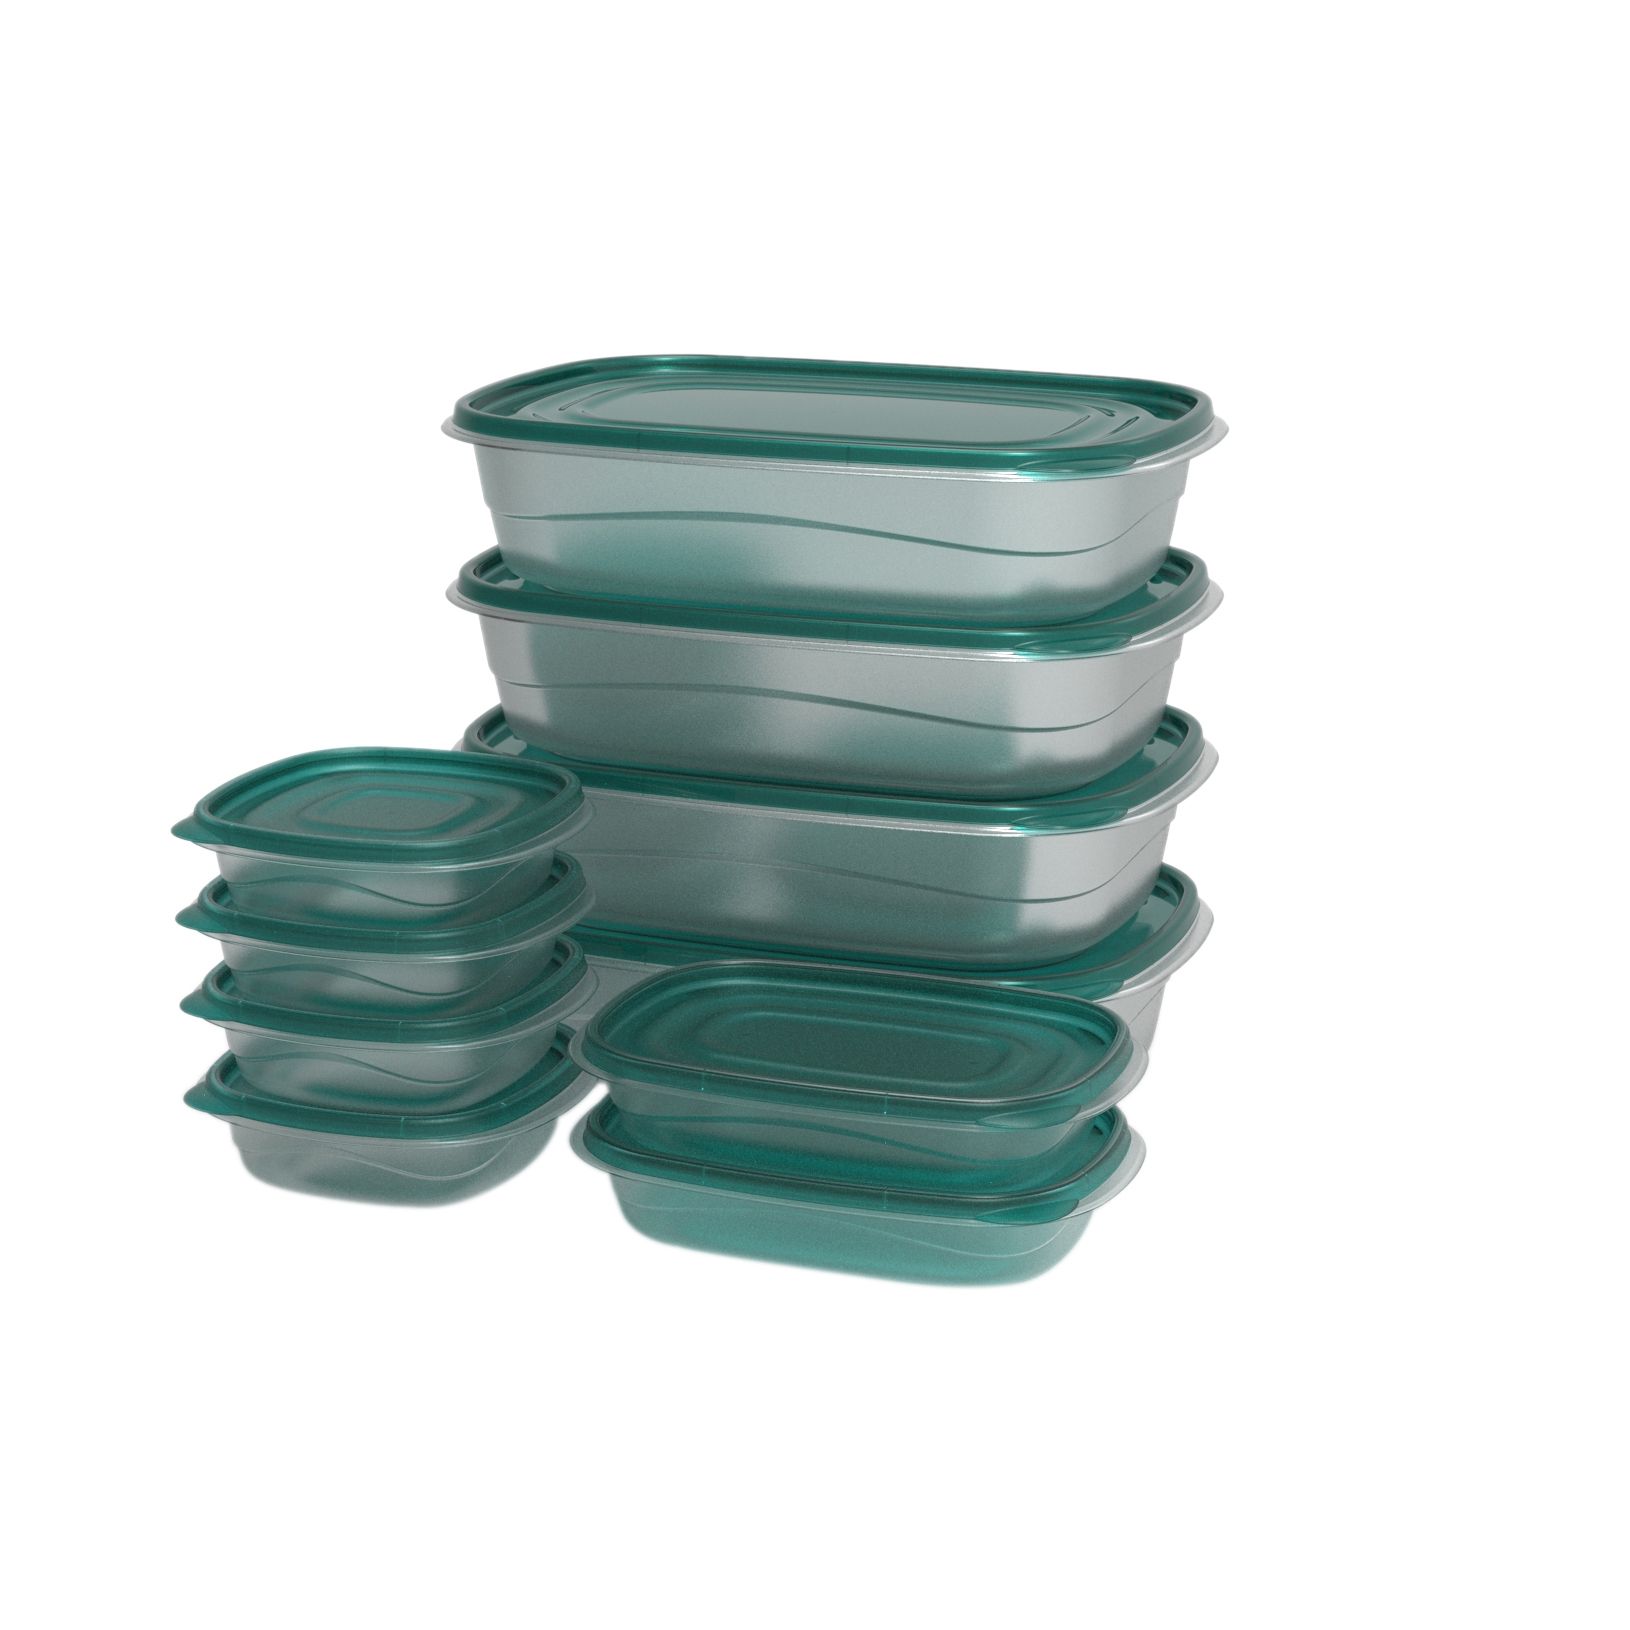 Thousands of people are buying these Rubbermaid food storage containers  before the holidays at under $5 apiece, Thestreet